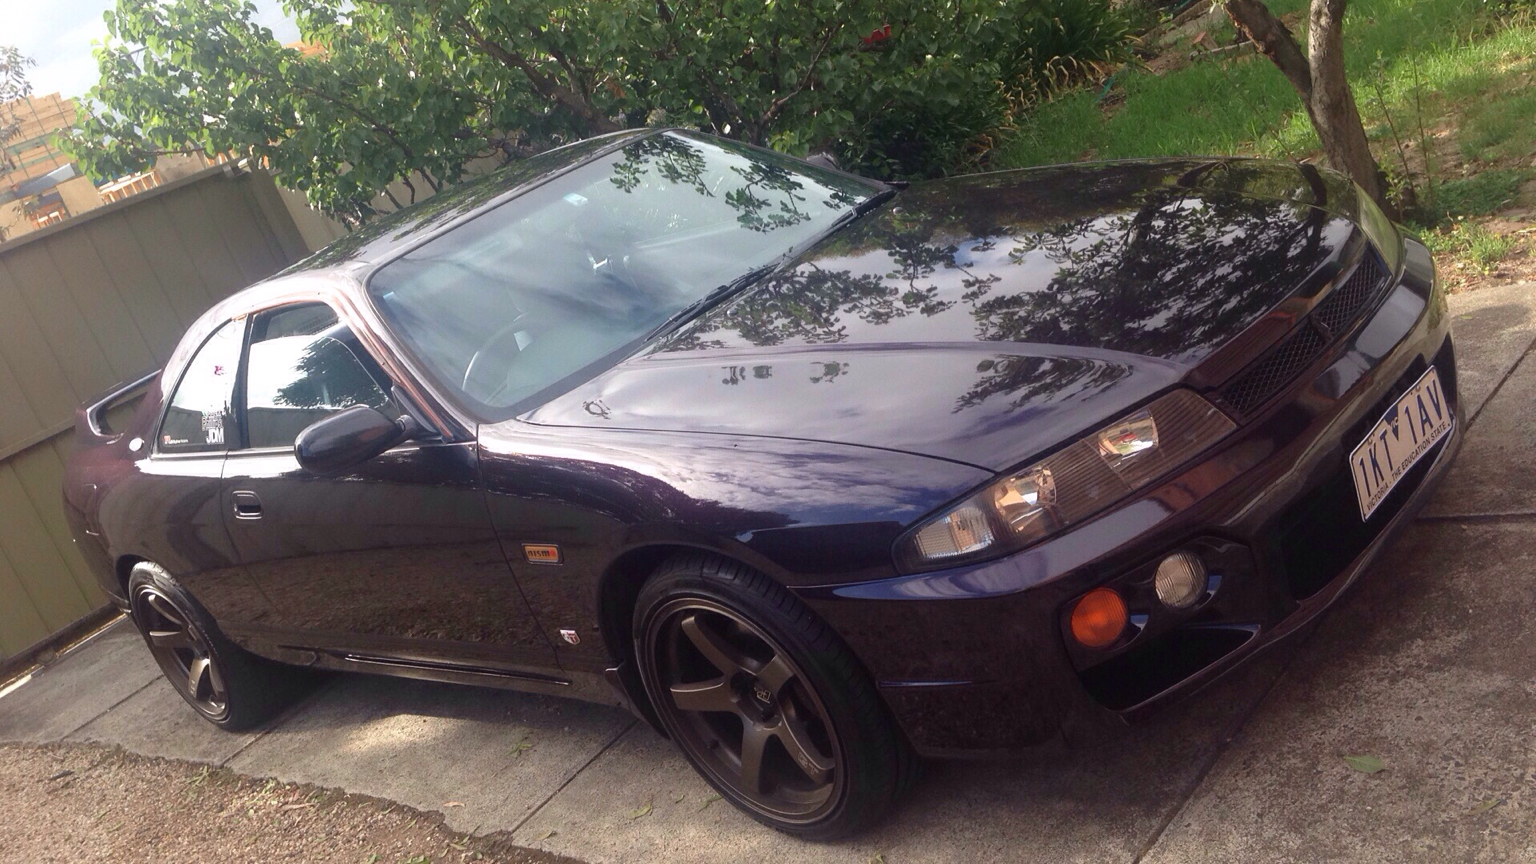 Rare 40th Anniversary S2 5 R33 Gtst Mspec Factory Midnight Purple For Sale Private Whole Cars Only Sau Community